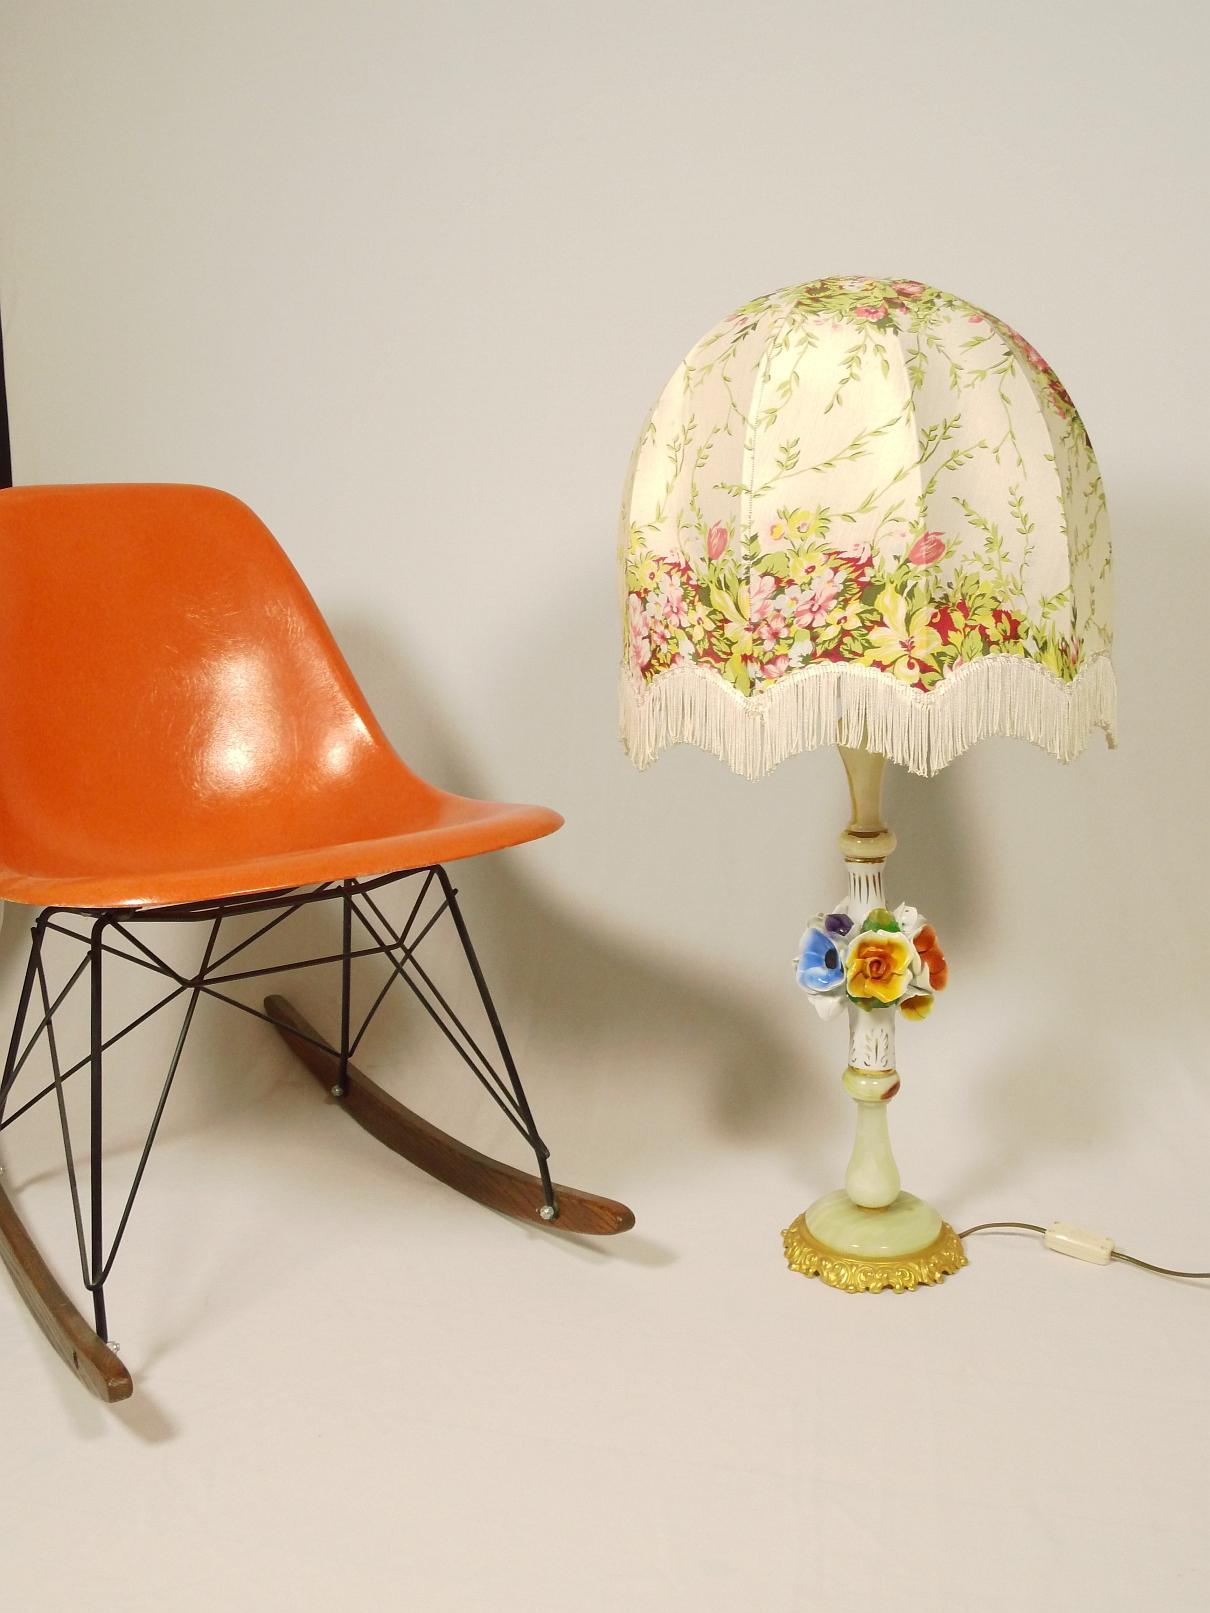 Exclusive large table lamp or floor lamp.
An original from the 1950s.

Handmade porcelain flowers on onyx base and brass. Great shade with fringes.
Very well preserved.

Makes very pleasant light.
For a person with a special style of